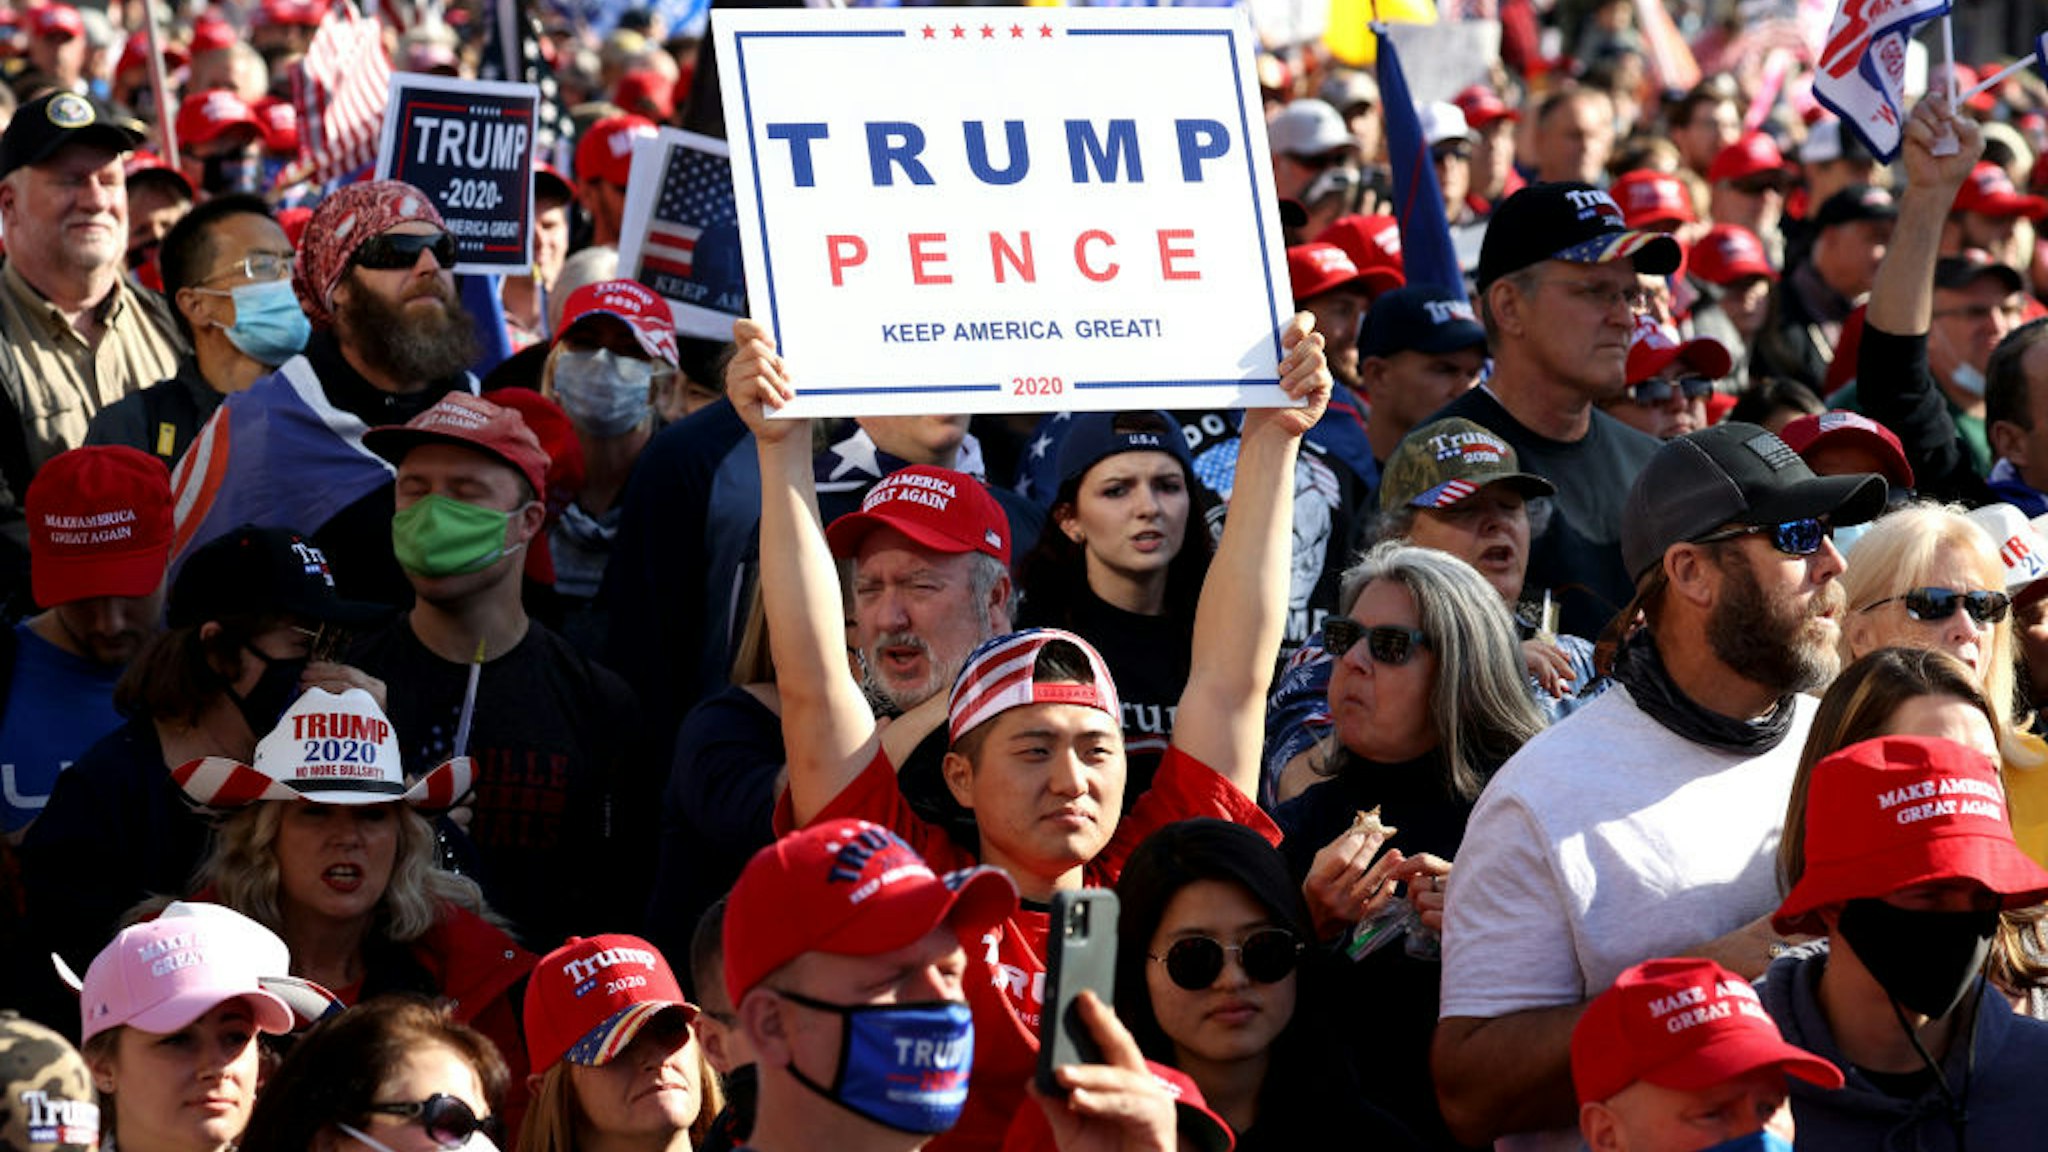 People participate in the “Million MAGA March” from Freedom Plaza to the Supreme Court, on November 14, 2020 in Washington, DC.